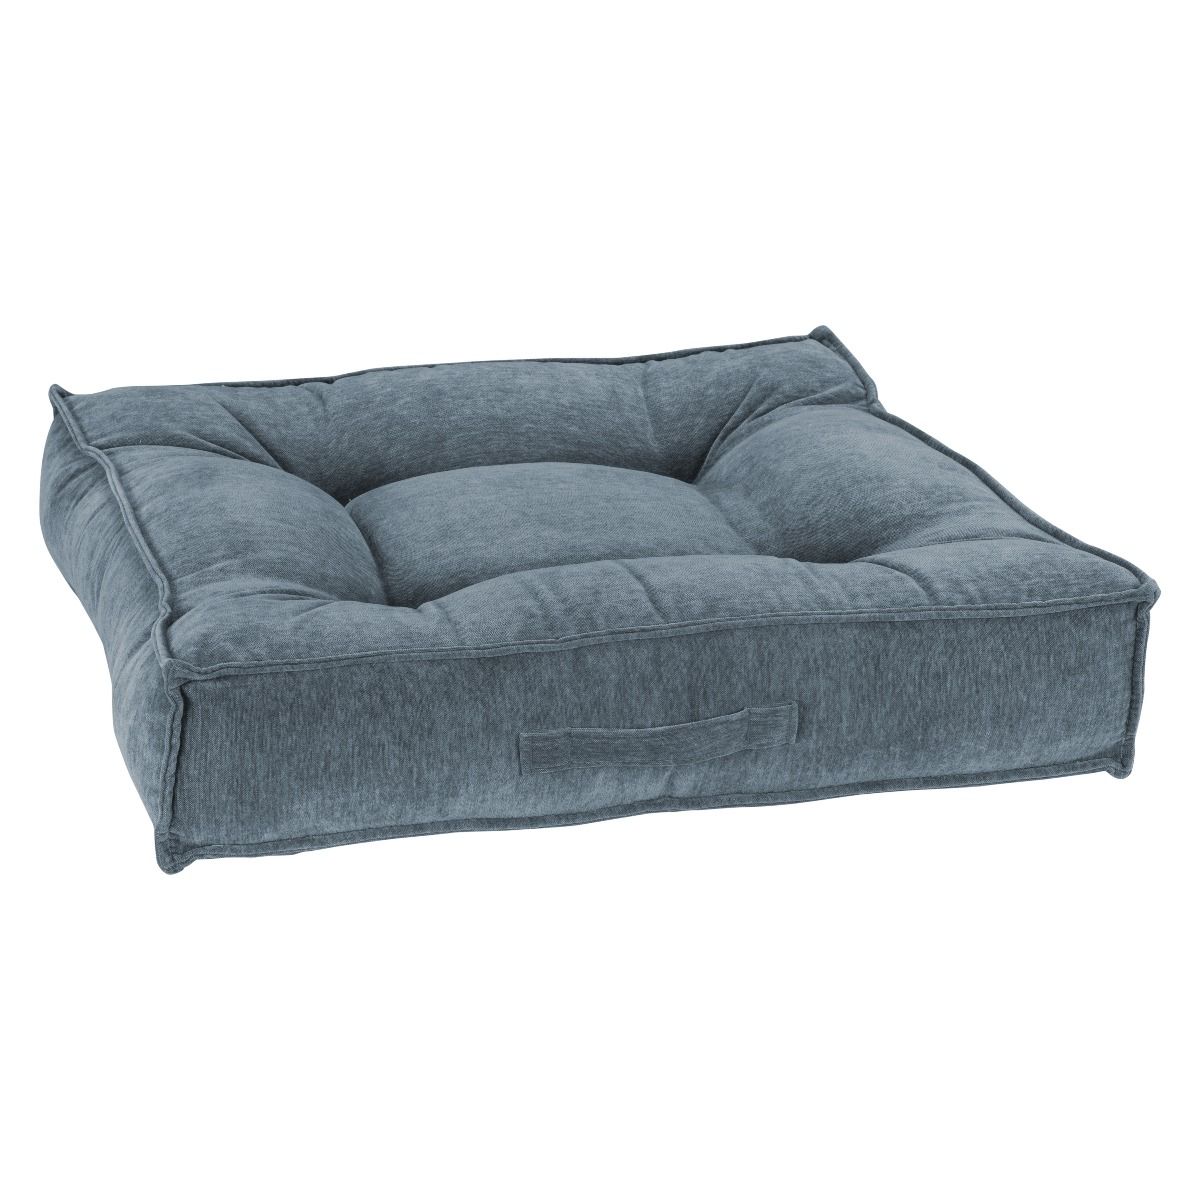 Pet Boutique - Dog Bed - Piazza Bed: Mineral